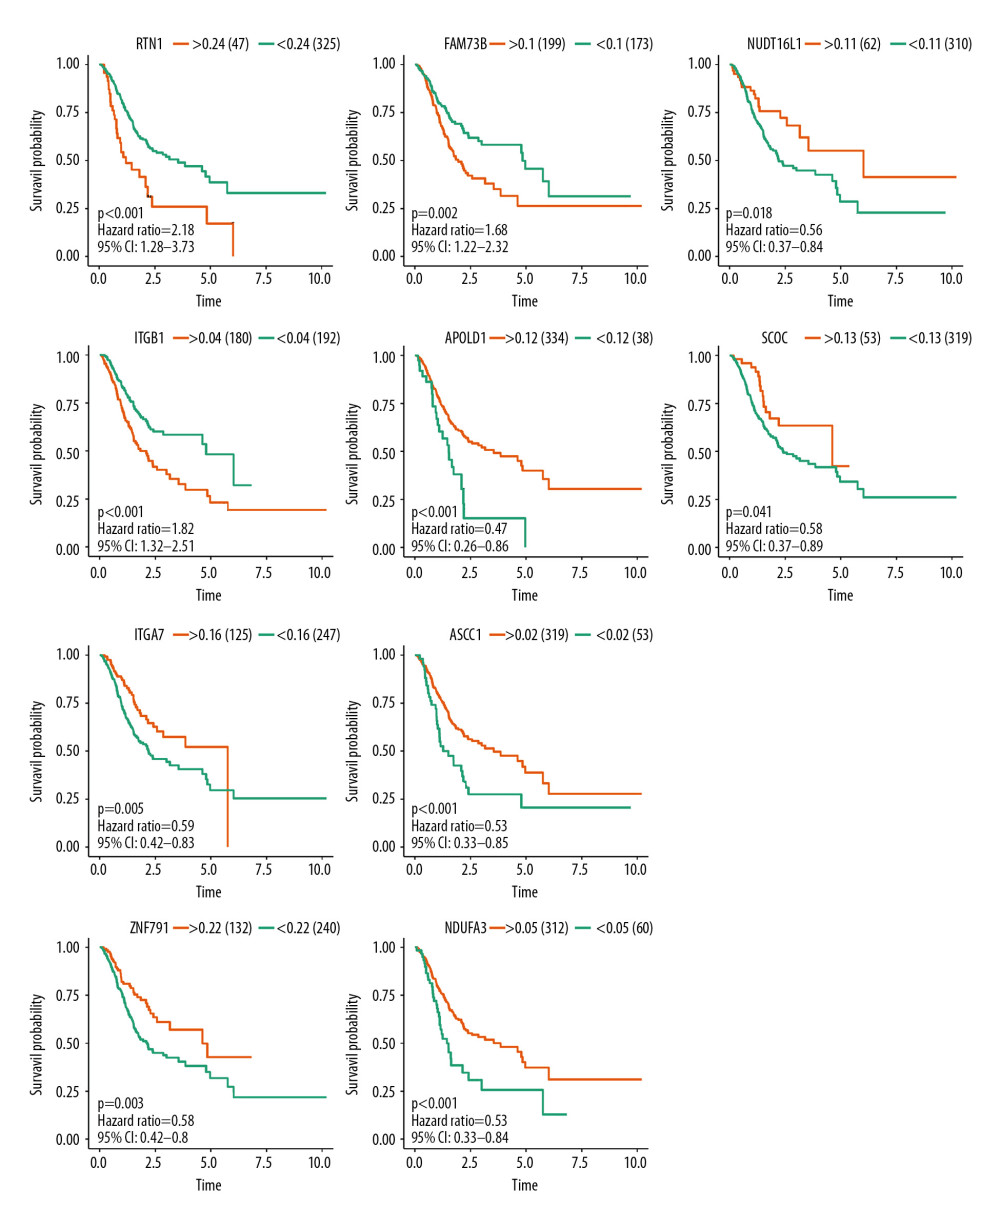 Survival analysis of the prognostic AS event associated with GC.